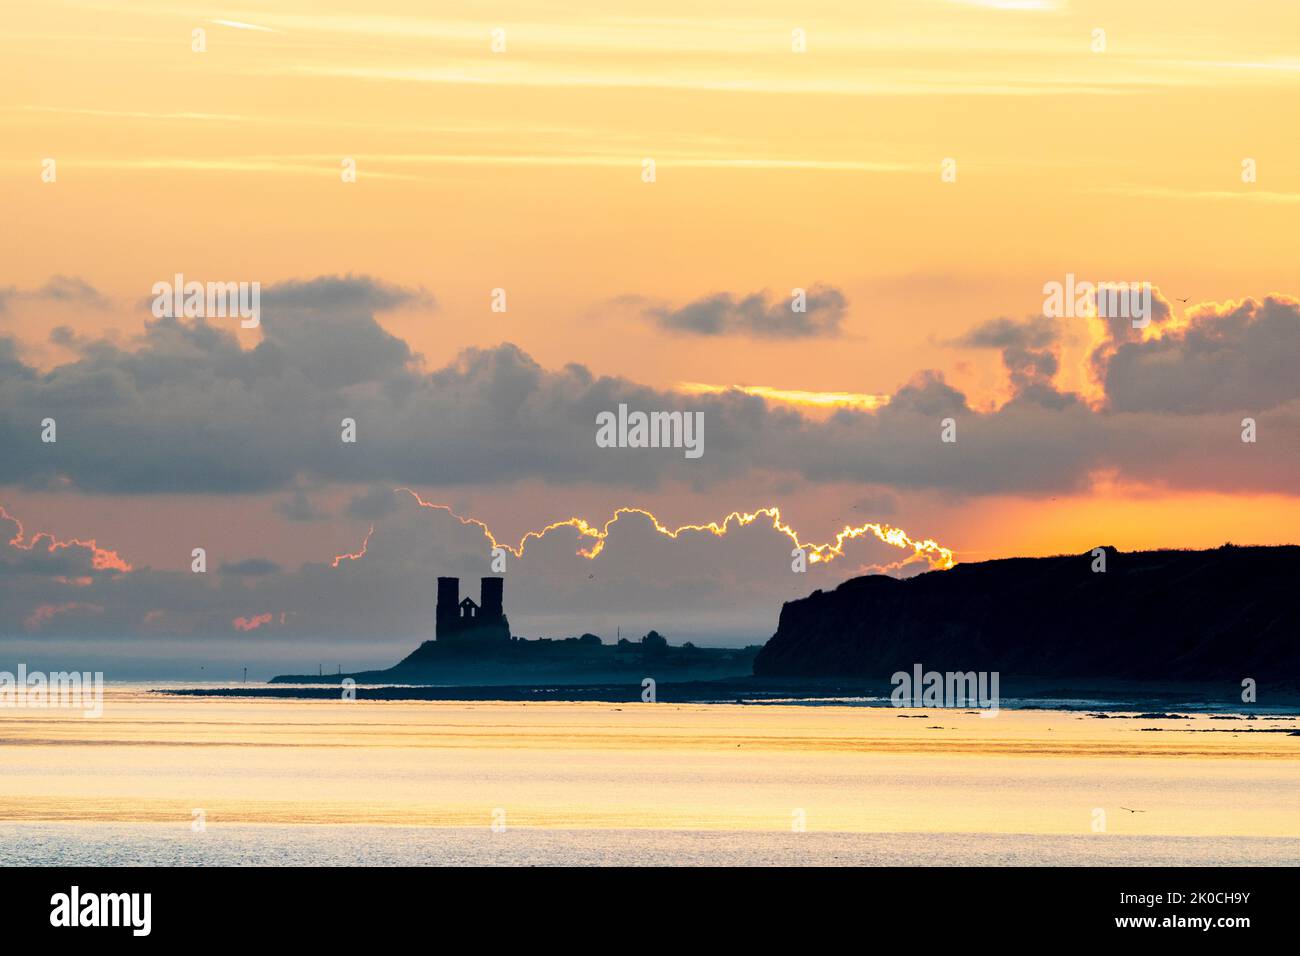 Herne Bay, Kent. 11/09/22. The dawn sky breaking over the sea and the landmark Reculver twin towers of the ruined 12th century church, long used as a navigation aid by seafarers. Some ground drifting in over the headland which was quickly dispersed when the sun rose. Credit-Malcolm Fairman, Alamy Live News. Stock Photo